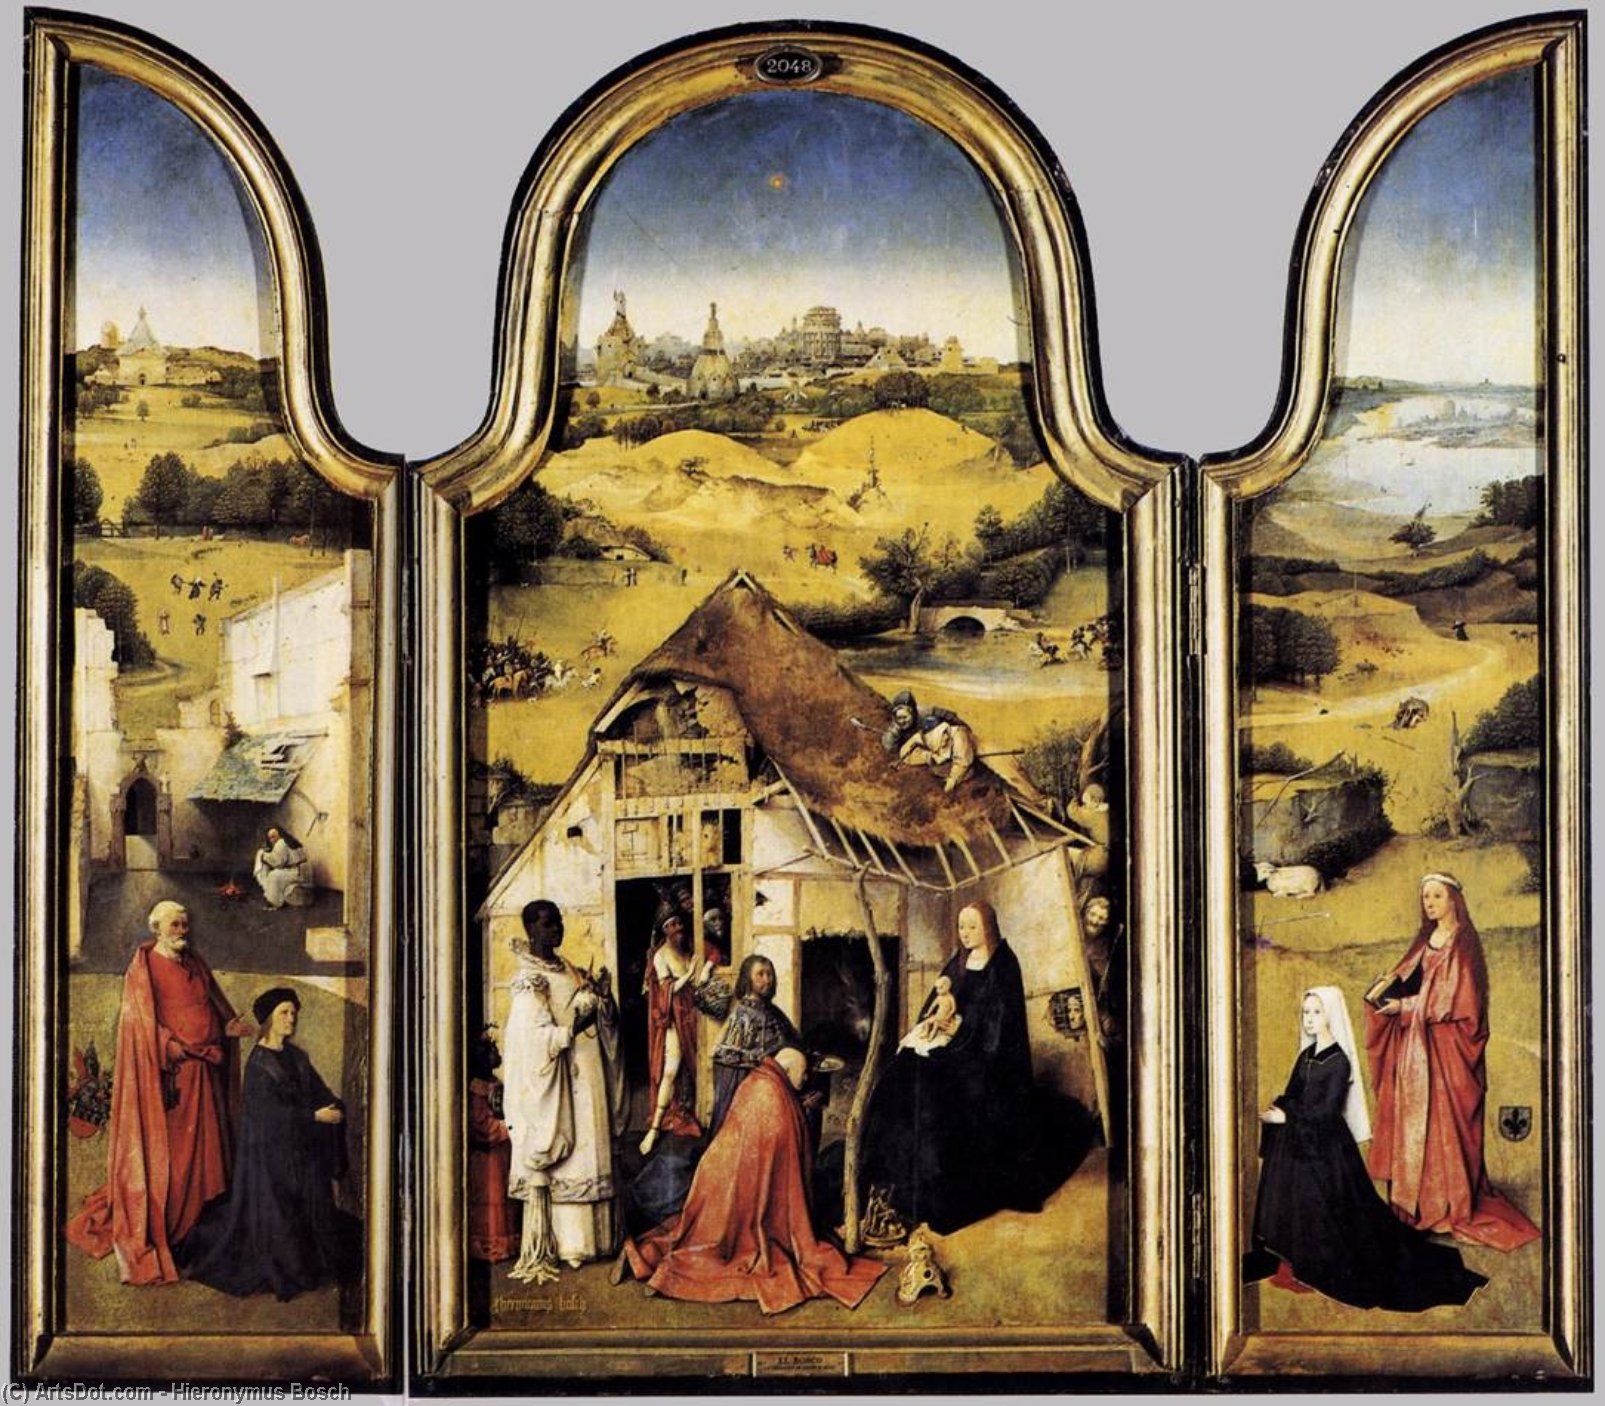 WikiOO.org - Encyclopedia of Fine Arts - Maleri, Artwork Hieronymus Bosch - Triptych of the Adoration of the Magi